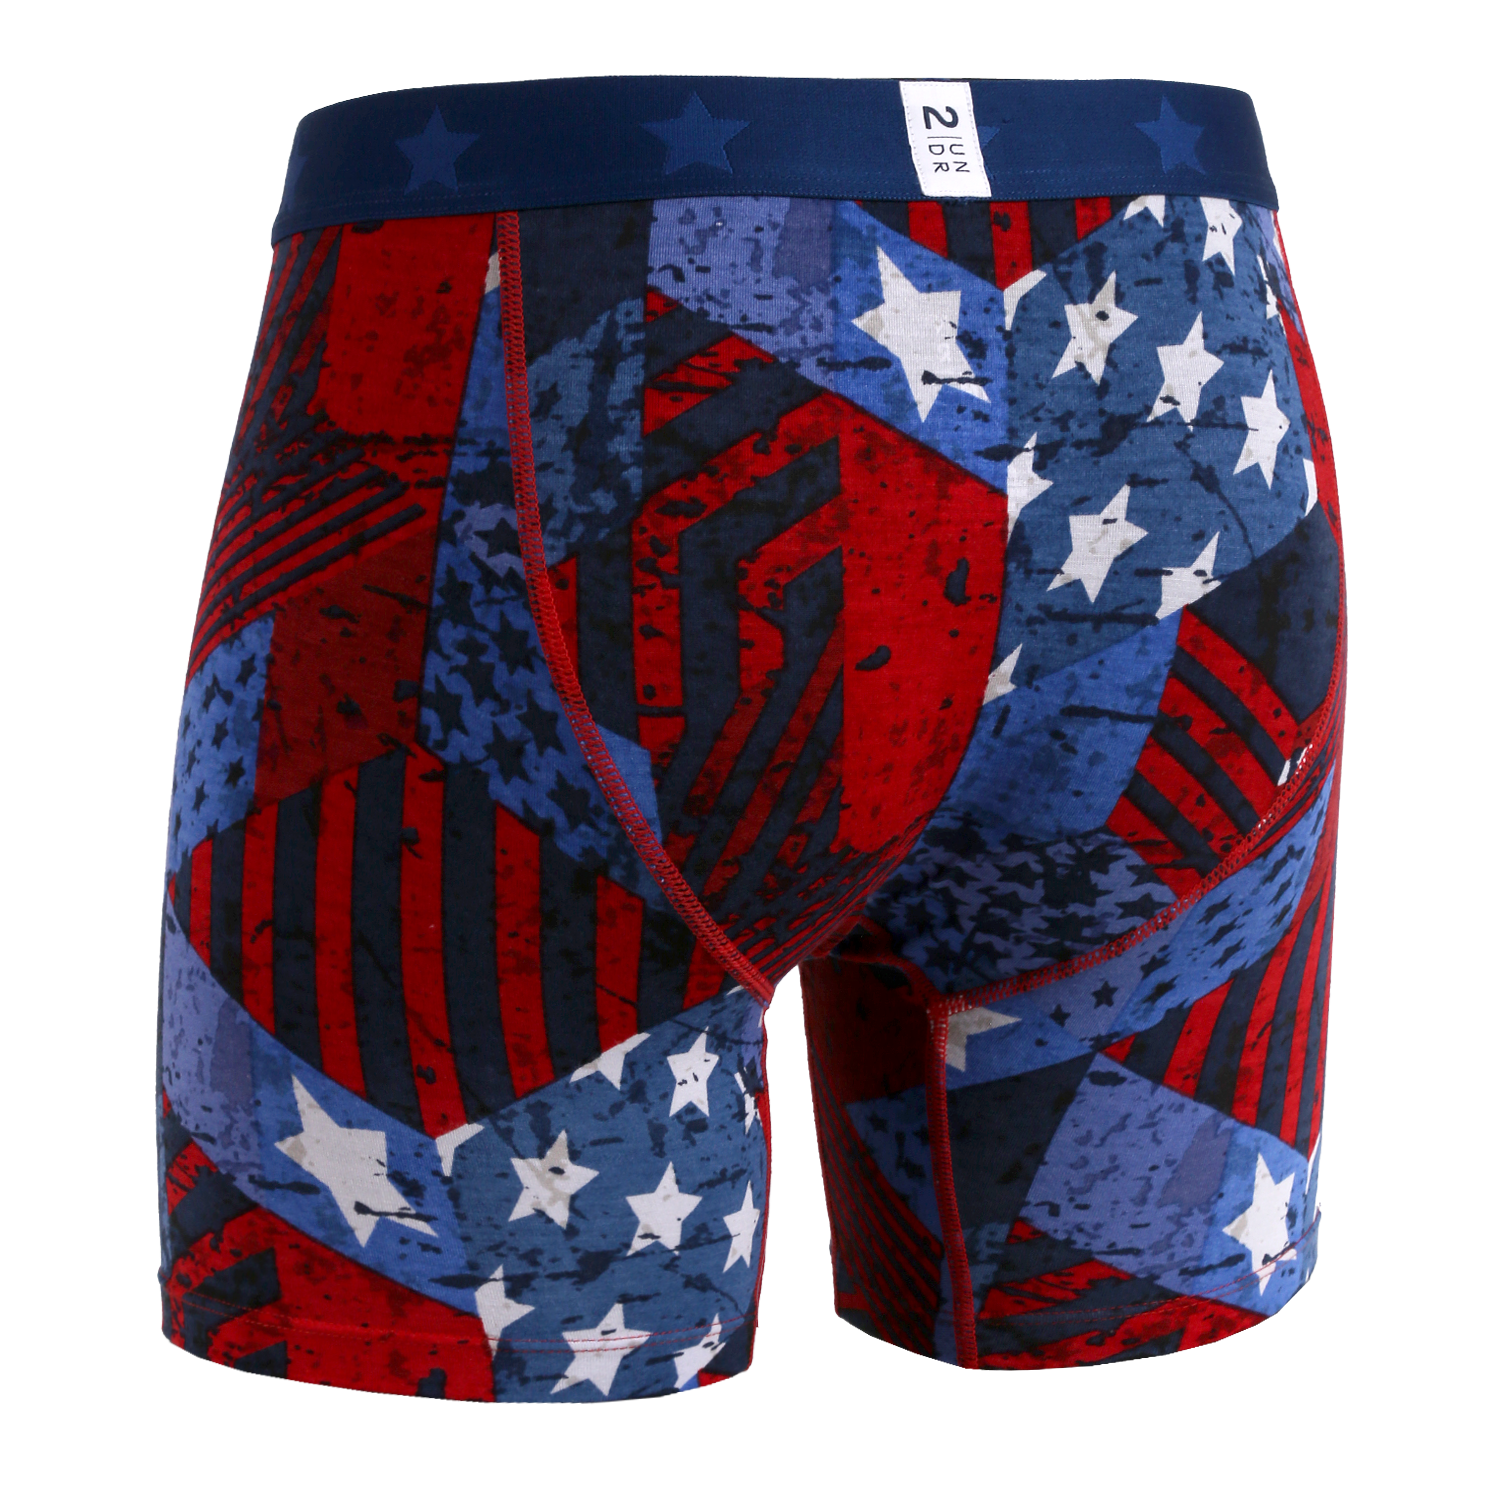 2UNDR Men's Joey Pouch SWING SHIFT - 6 Boxer Modal Fabric Bulls Print ~  WITHOUT BOX